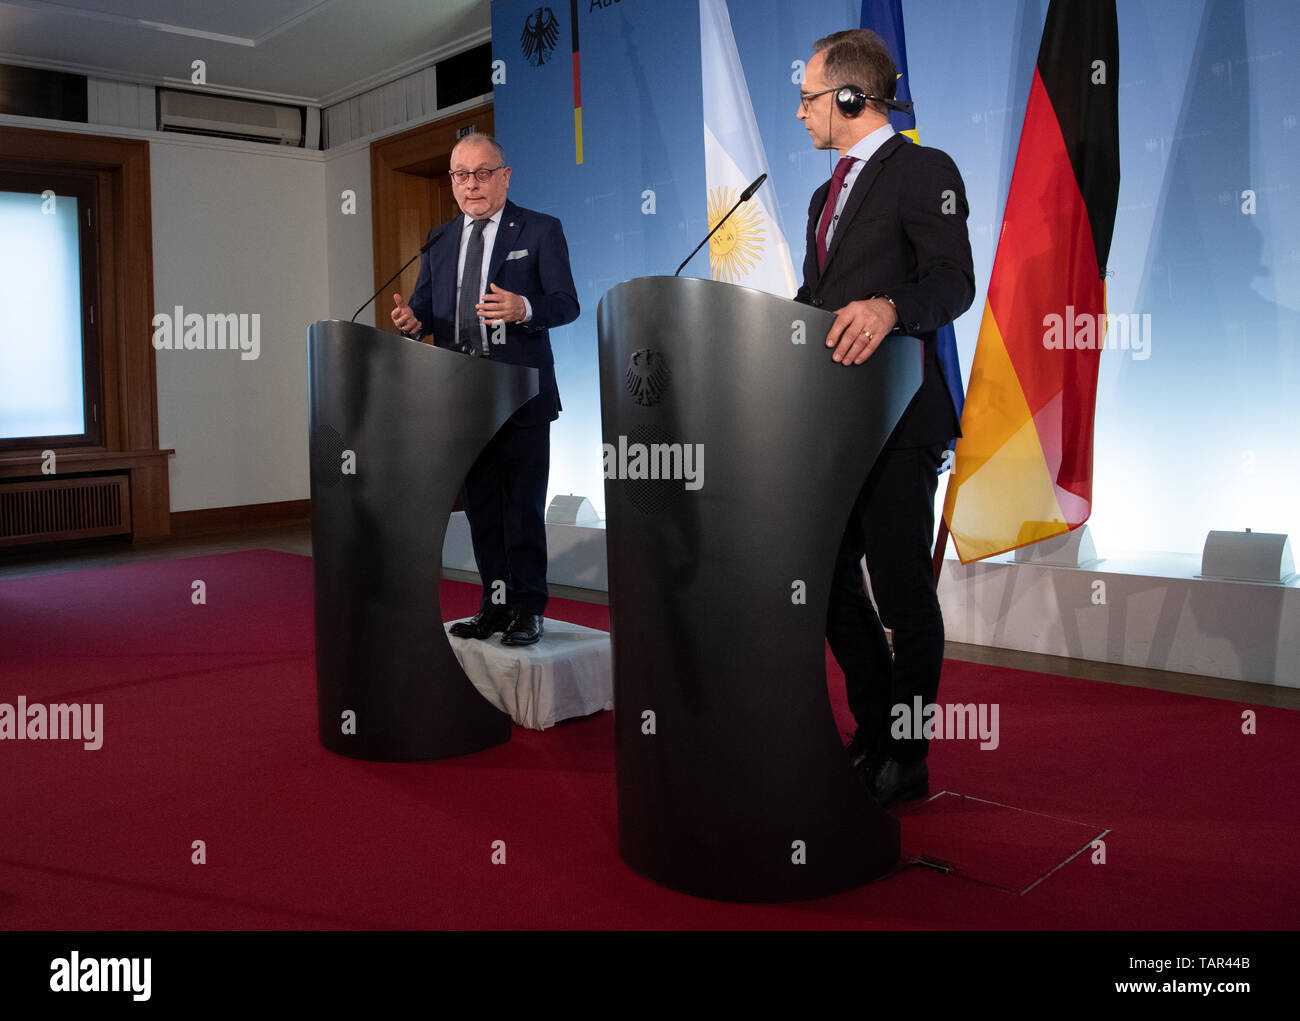 Berlin, Germany. 27th May, 2019. Heiko Maas (SPD, r), Federal Foreign Minister, and Jorge Marcelo Faurie, Foreign Minister of Argentina, will hold a press conference at the Federal Foreign Office. A Latin America and Caribbean Conference will be held at the Federal Foreign Office from 28 May 2019. More than 20 foreign ministers from the region are expected. Credit: Ralf Hirschberger/dpa/Alamy Live News Stock Photo